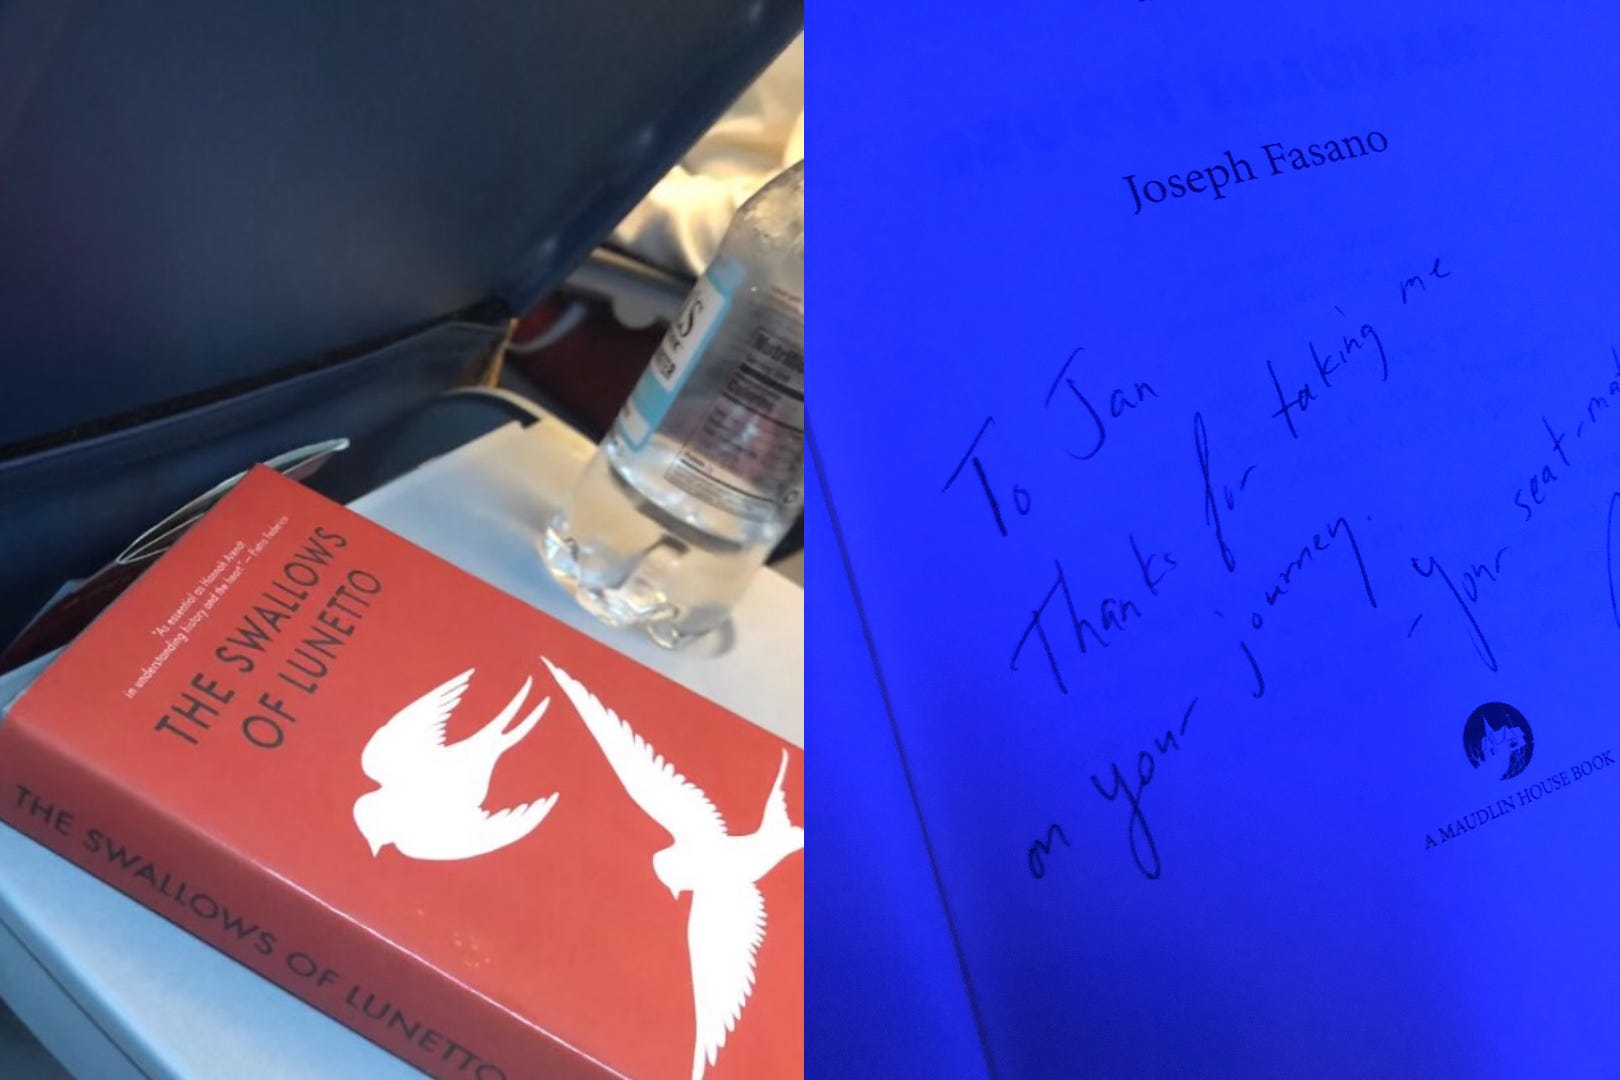 Magical moment' for author as he sat next to stranger on plane reading his  book | The Independent